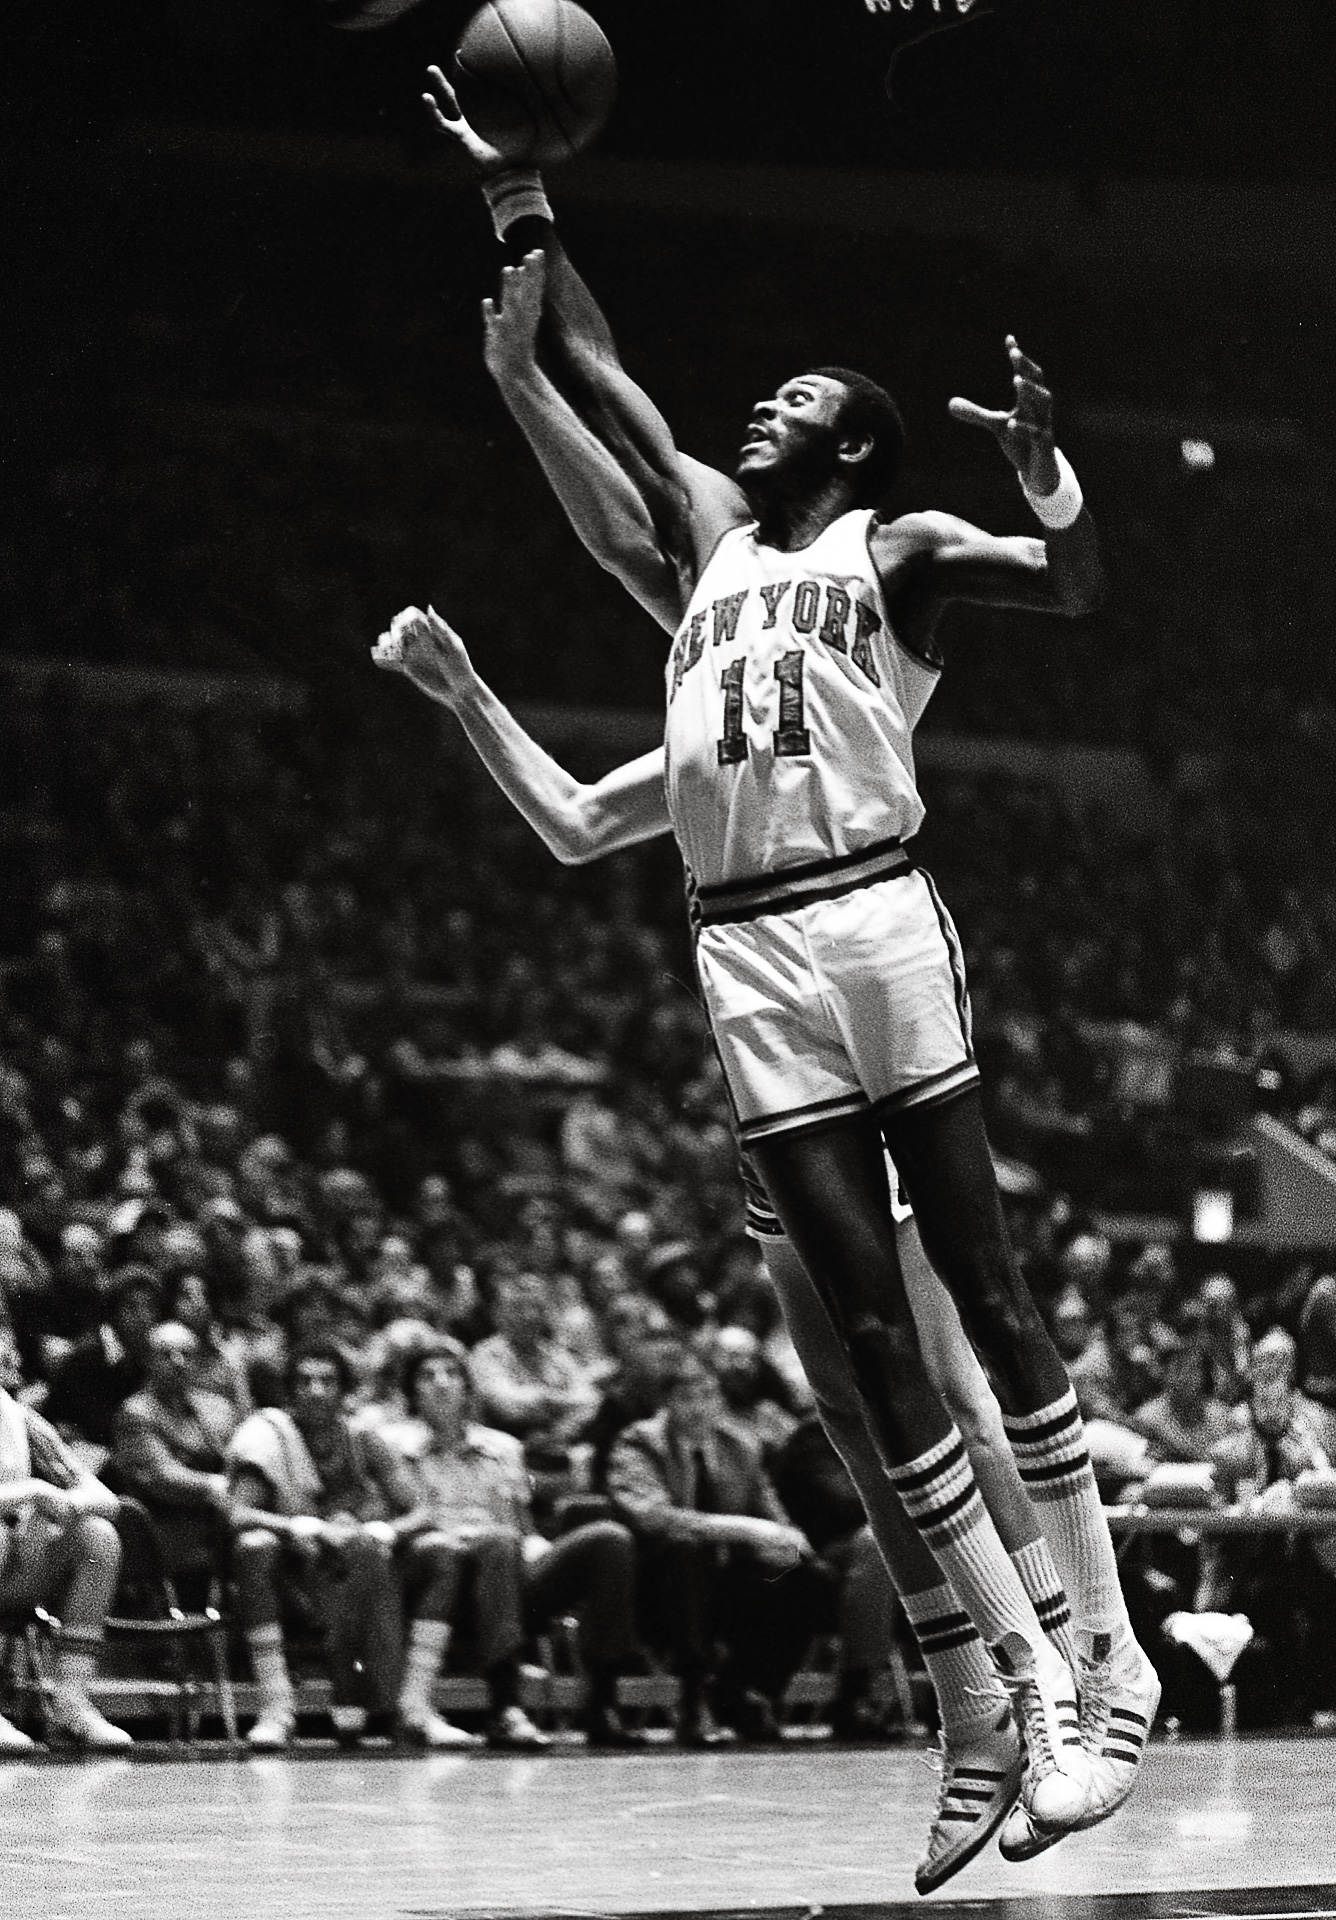 Bob McAdoo: Was He a One-Man Basketball Revolution? 1975 – From